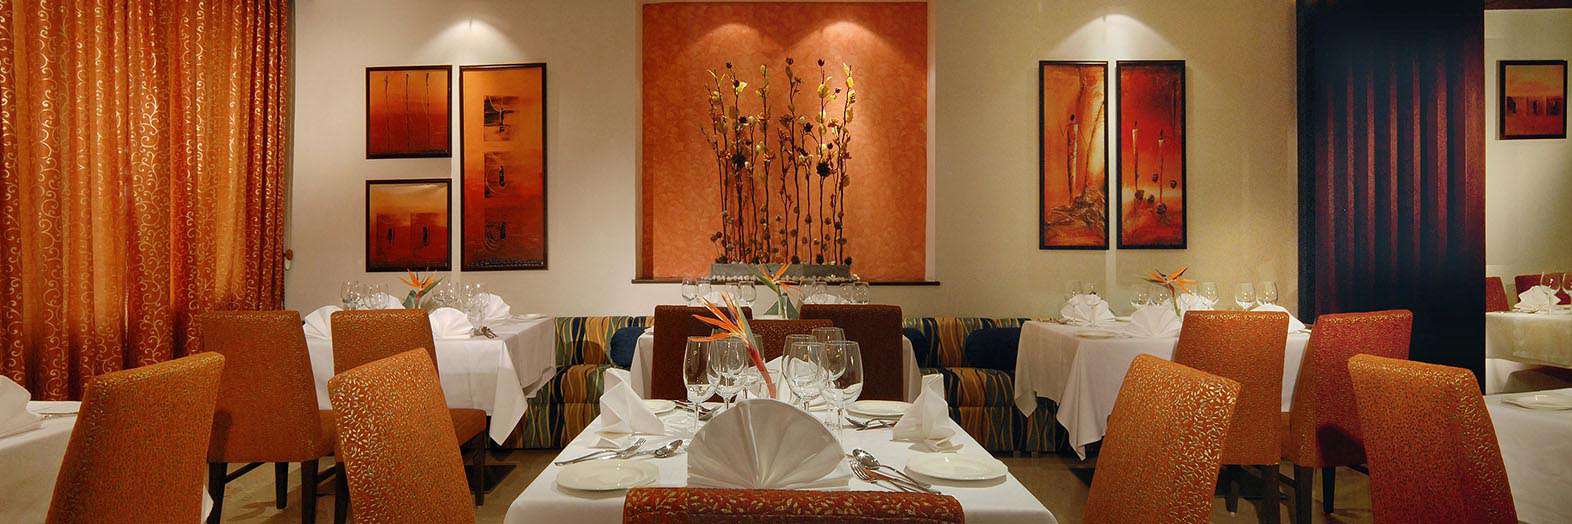 Fortune Select Global – Hotels in Gurgaon Dining